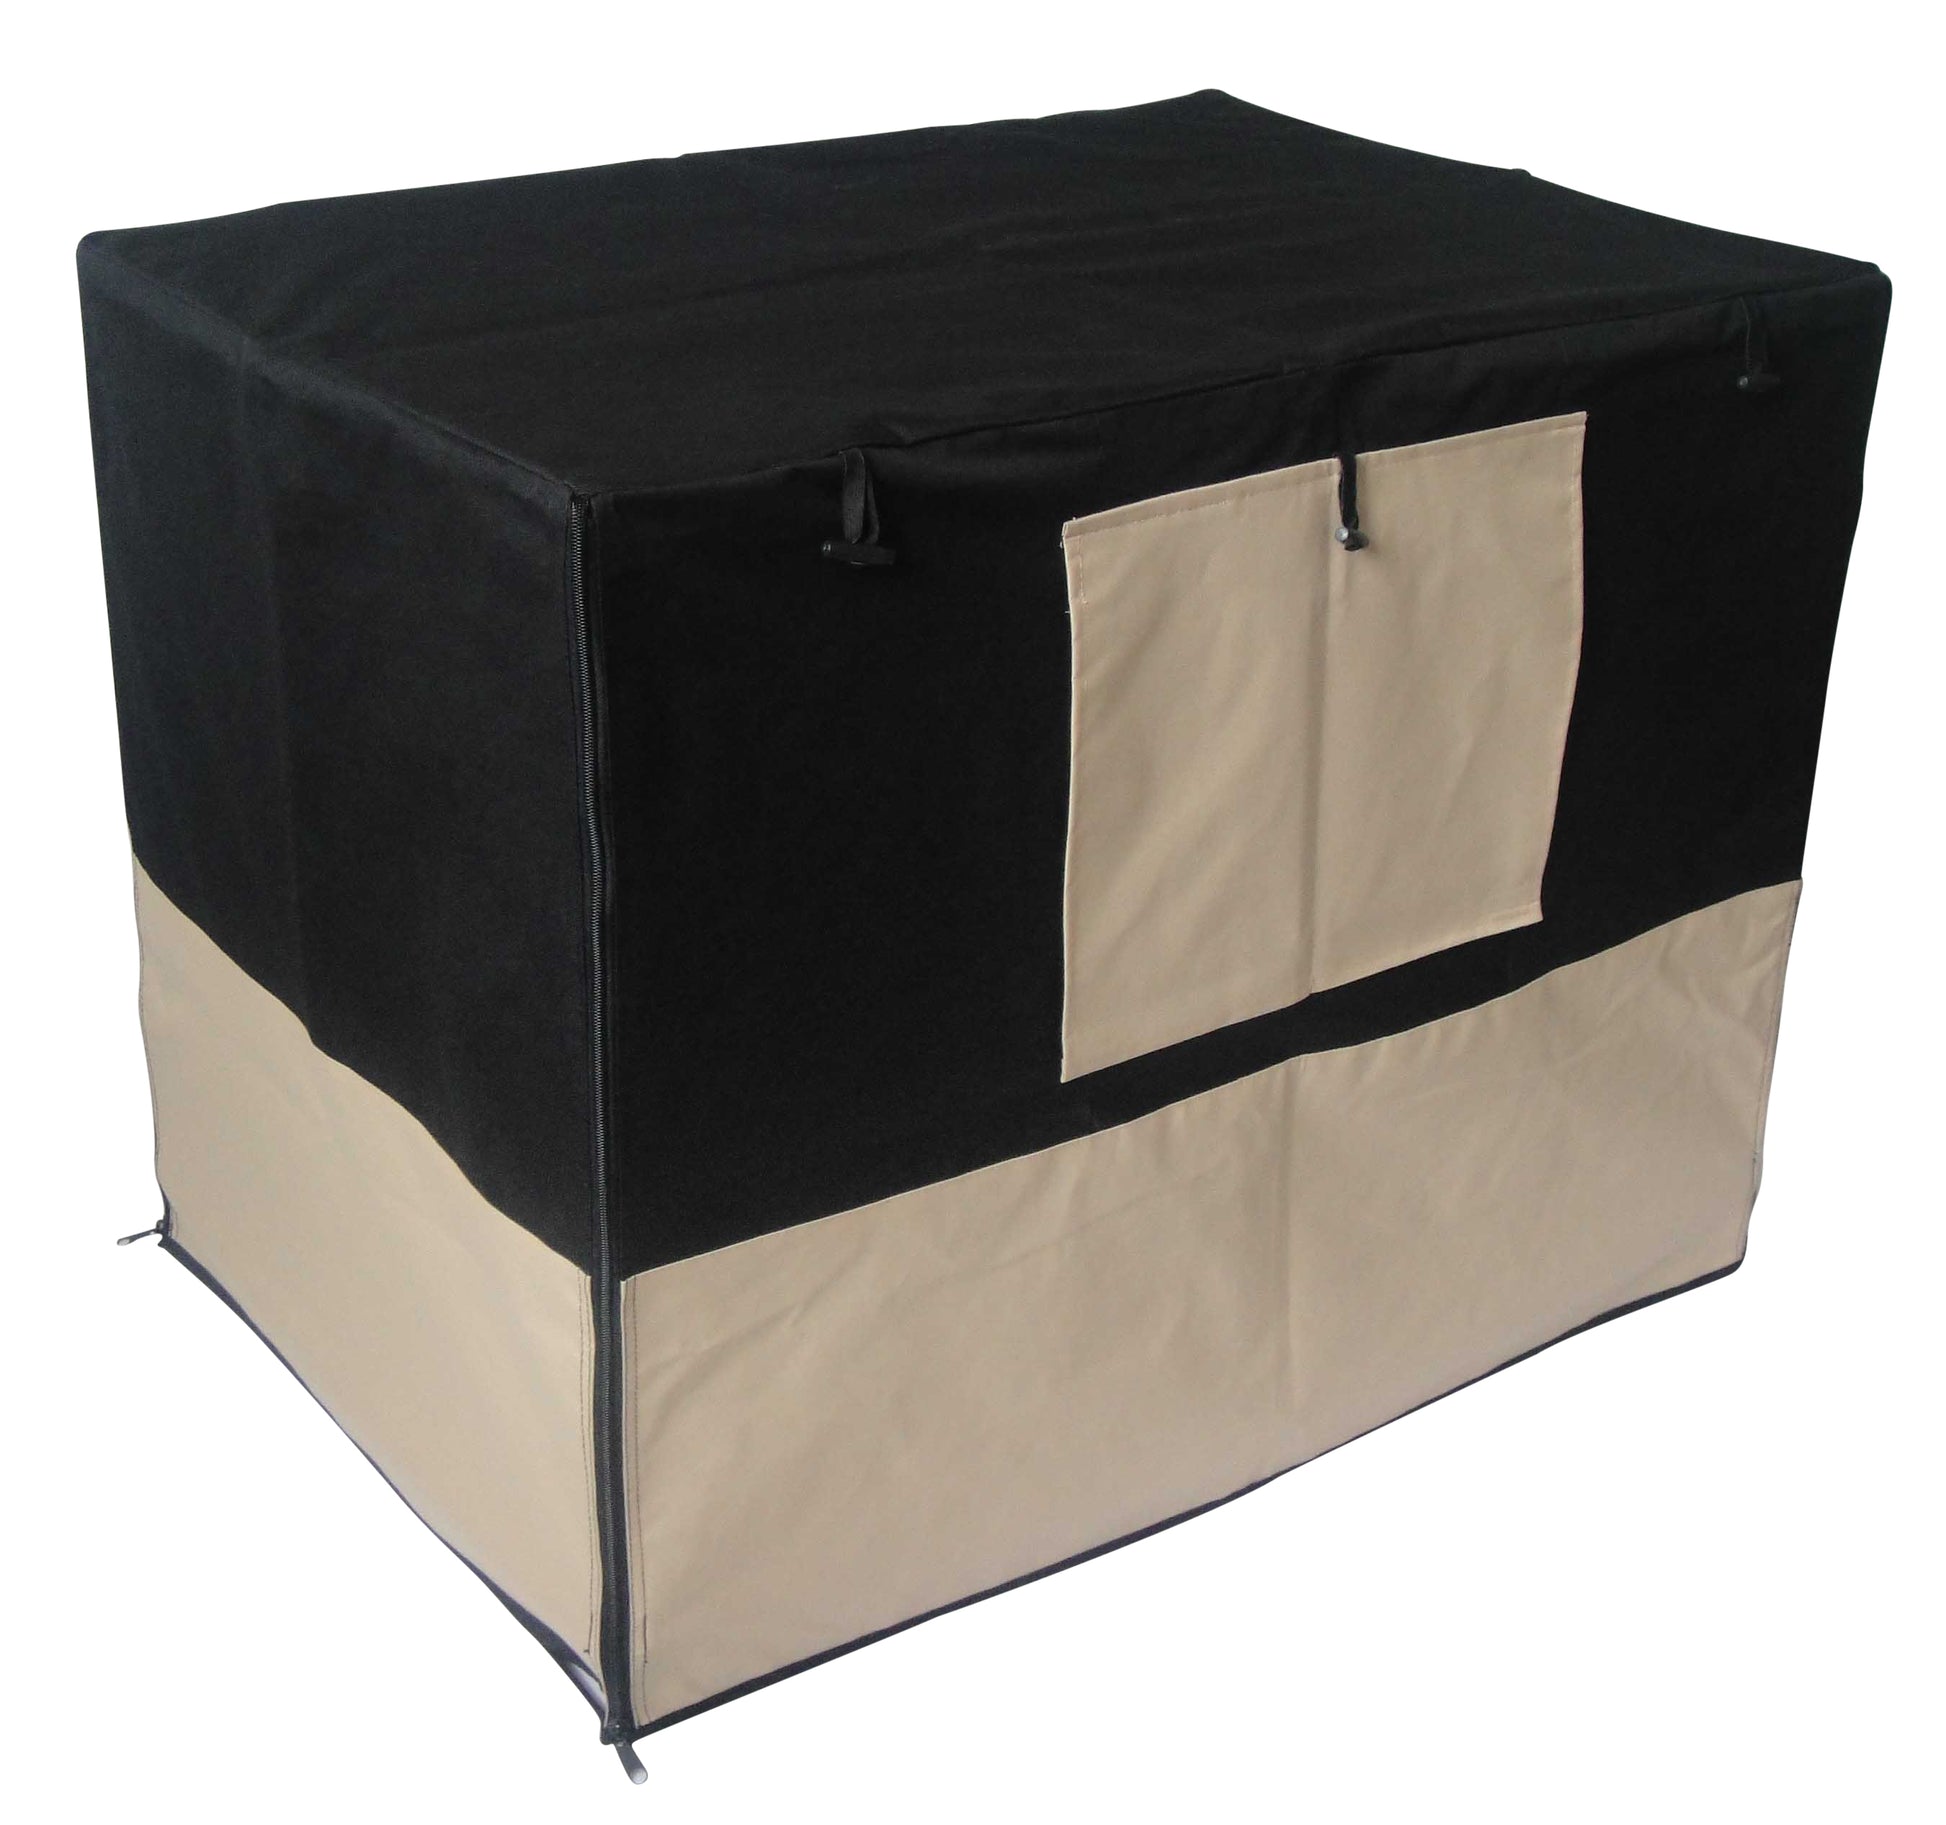 36" Pet Dog Crate with Waterproof Cover - image6